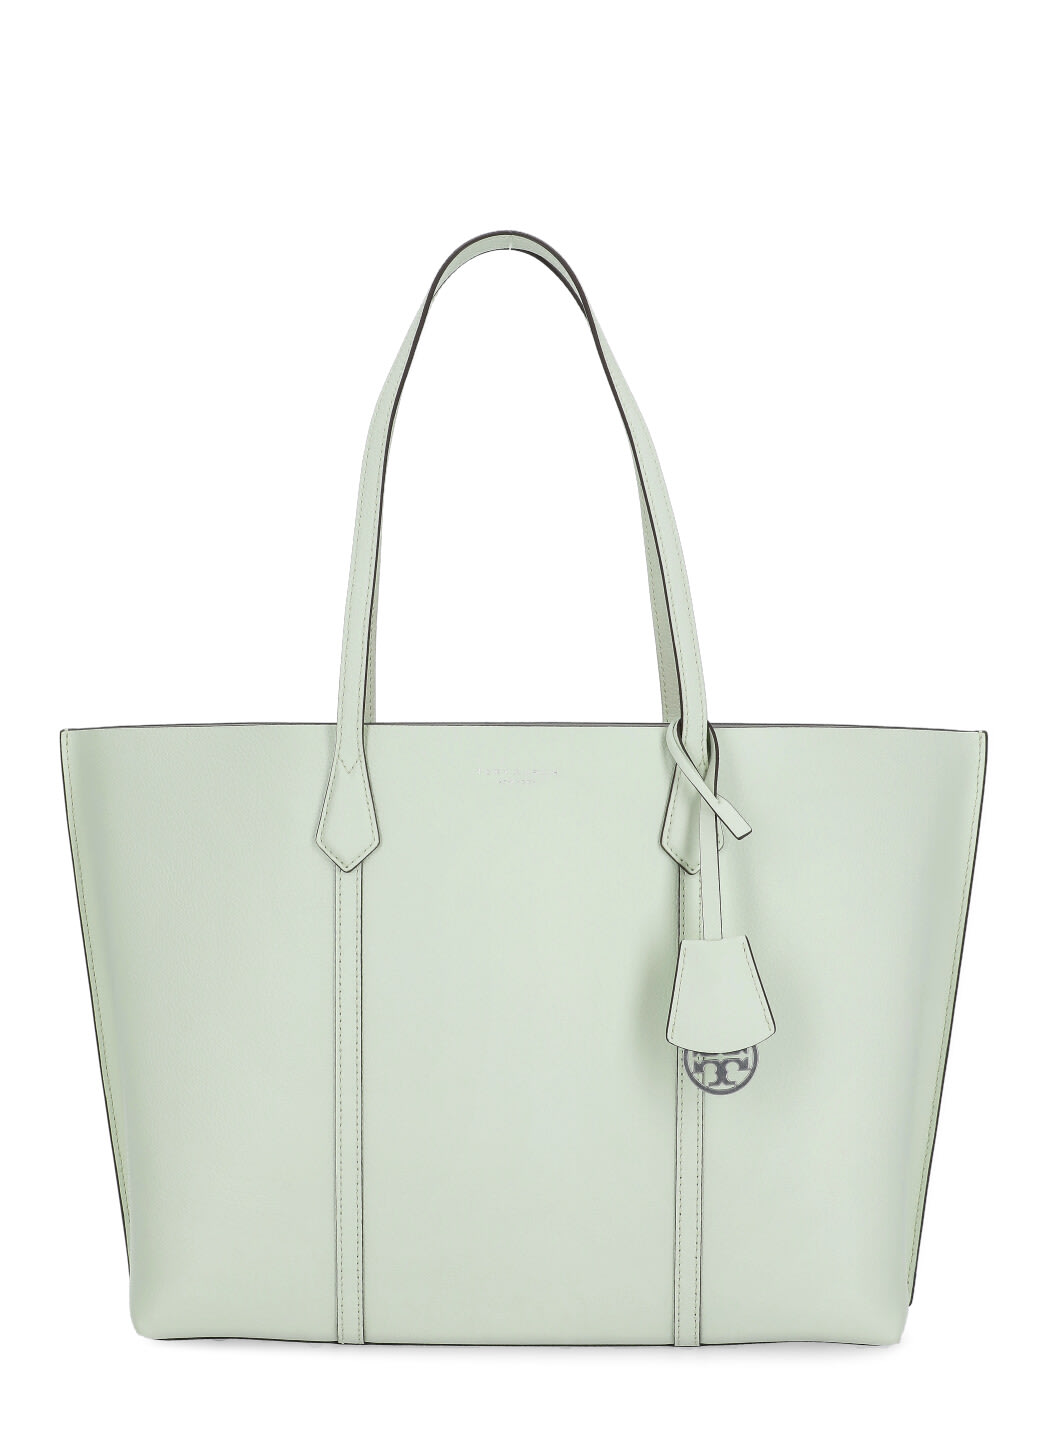  Tory Burch Women's Perry Triple Compartment Tote